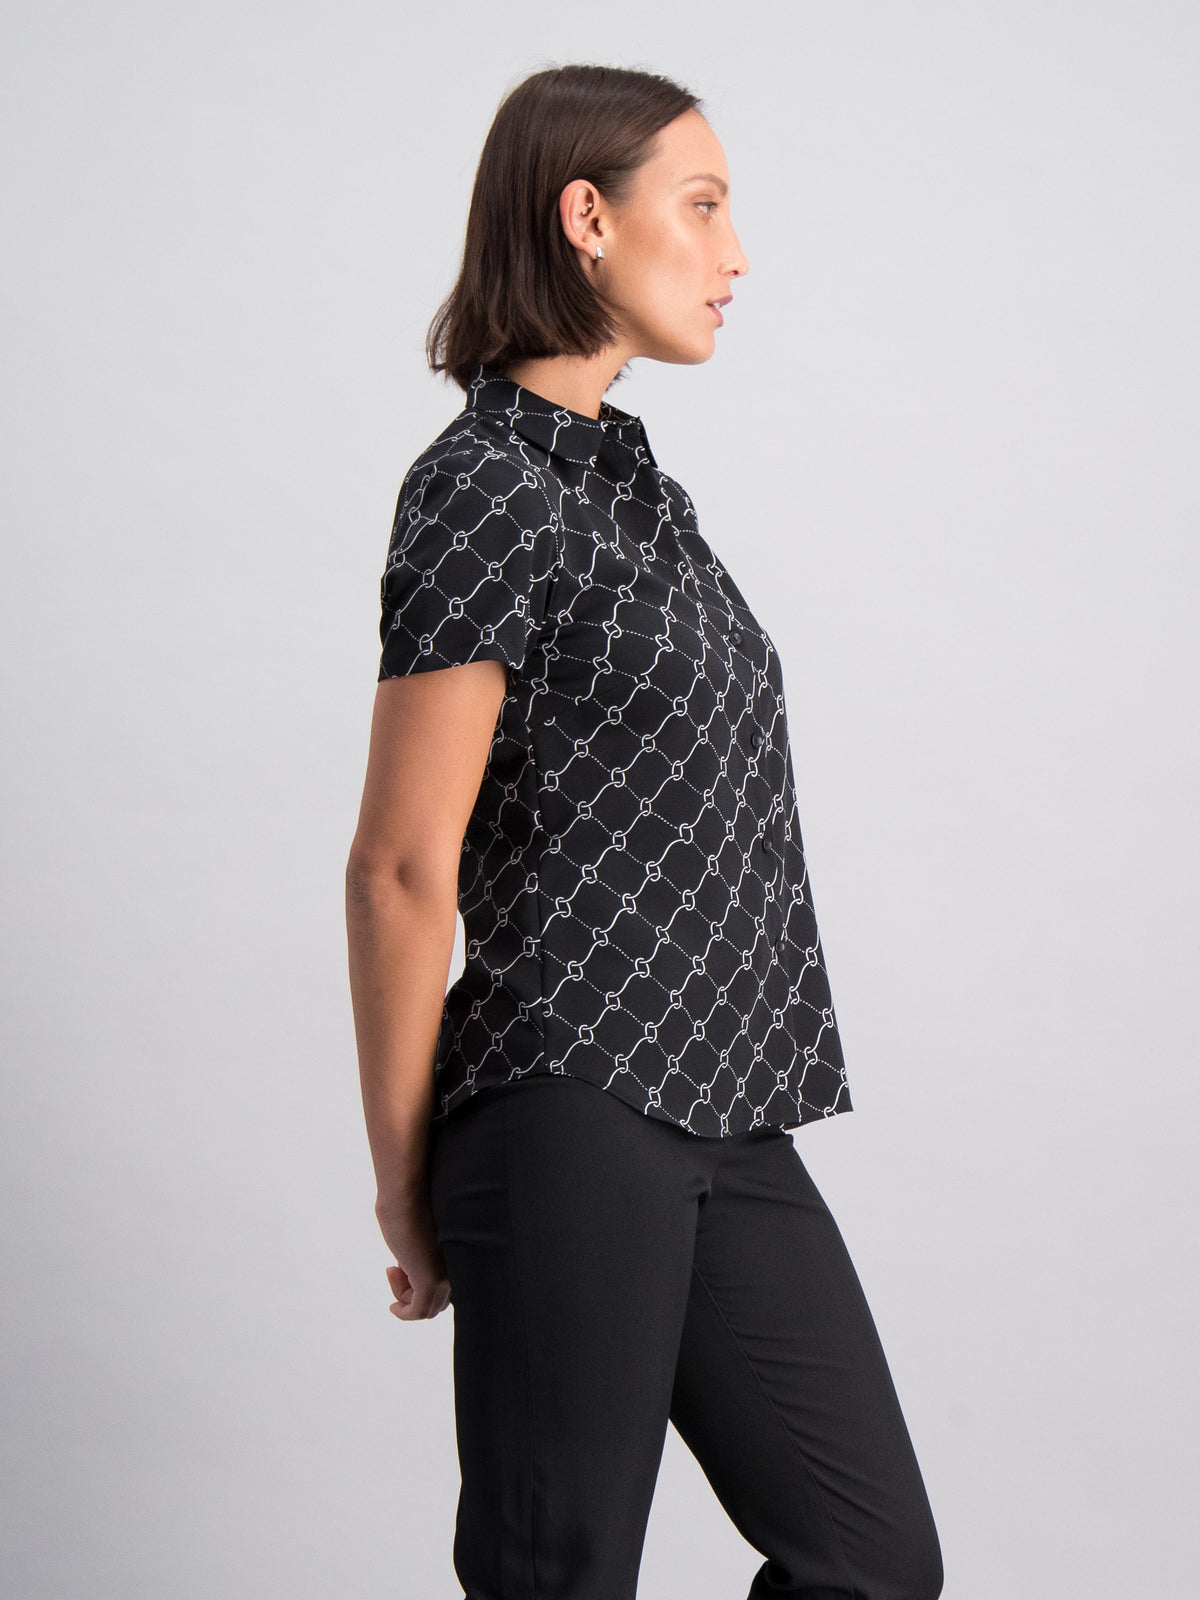 Carrie classic buttoned shirt - black/white